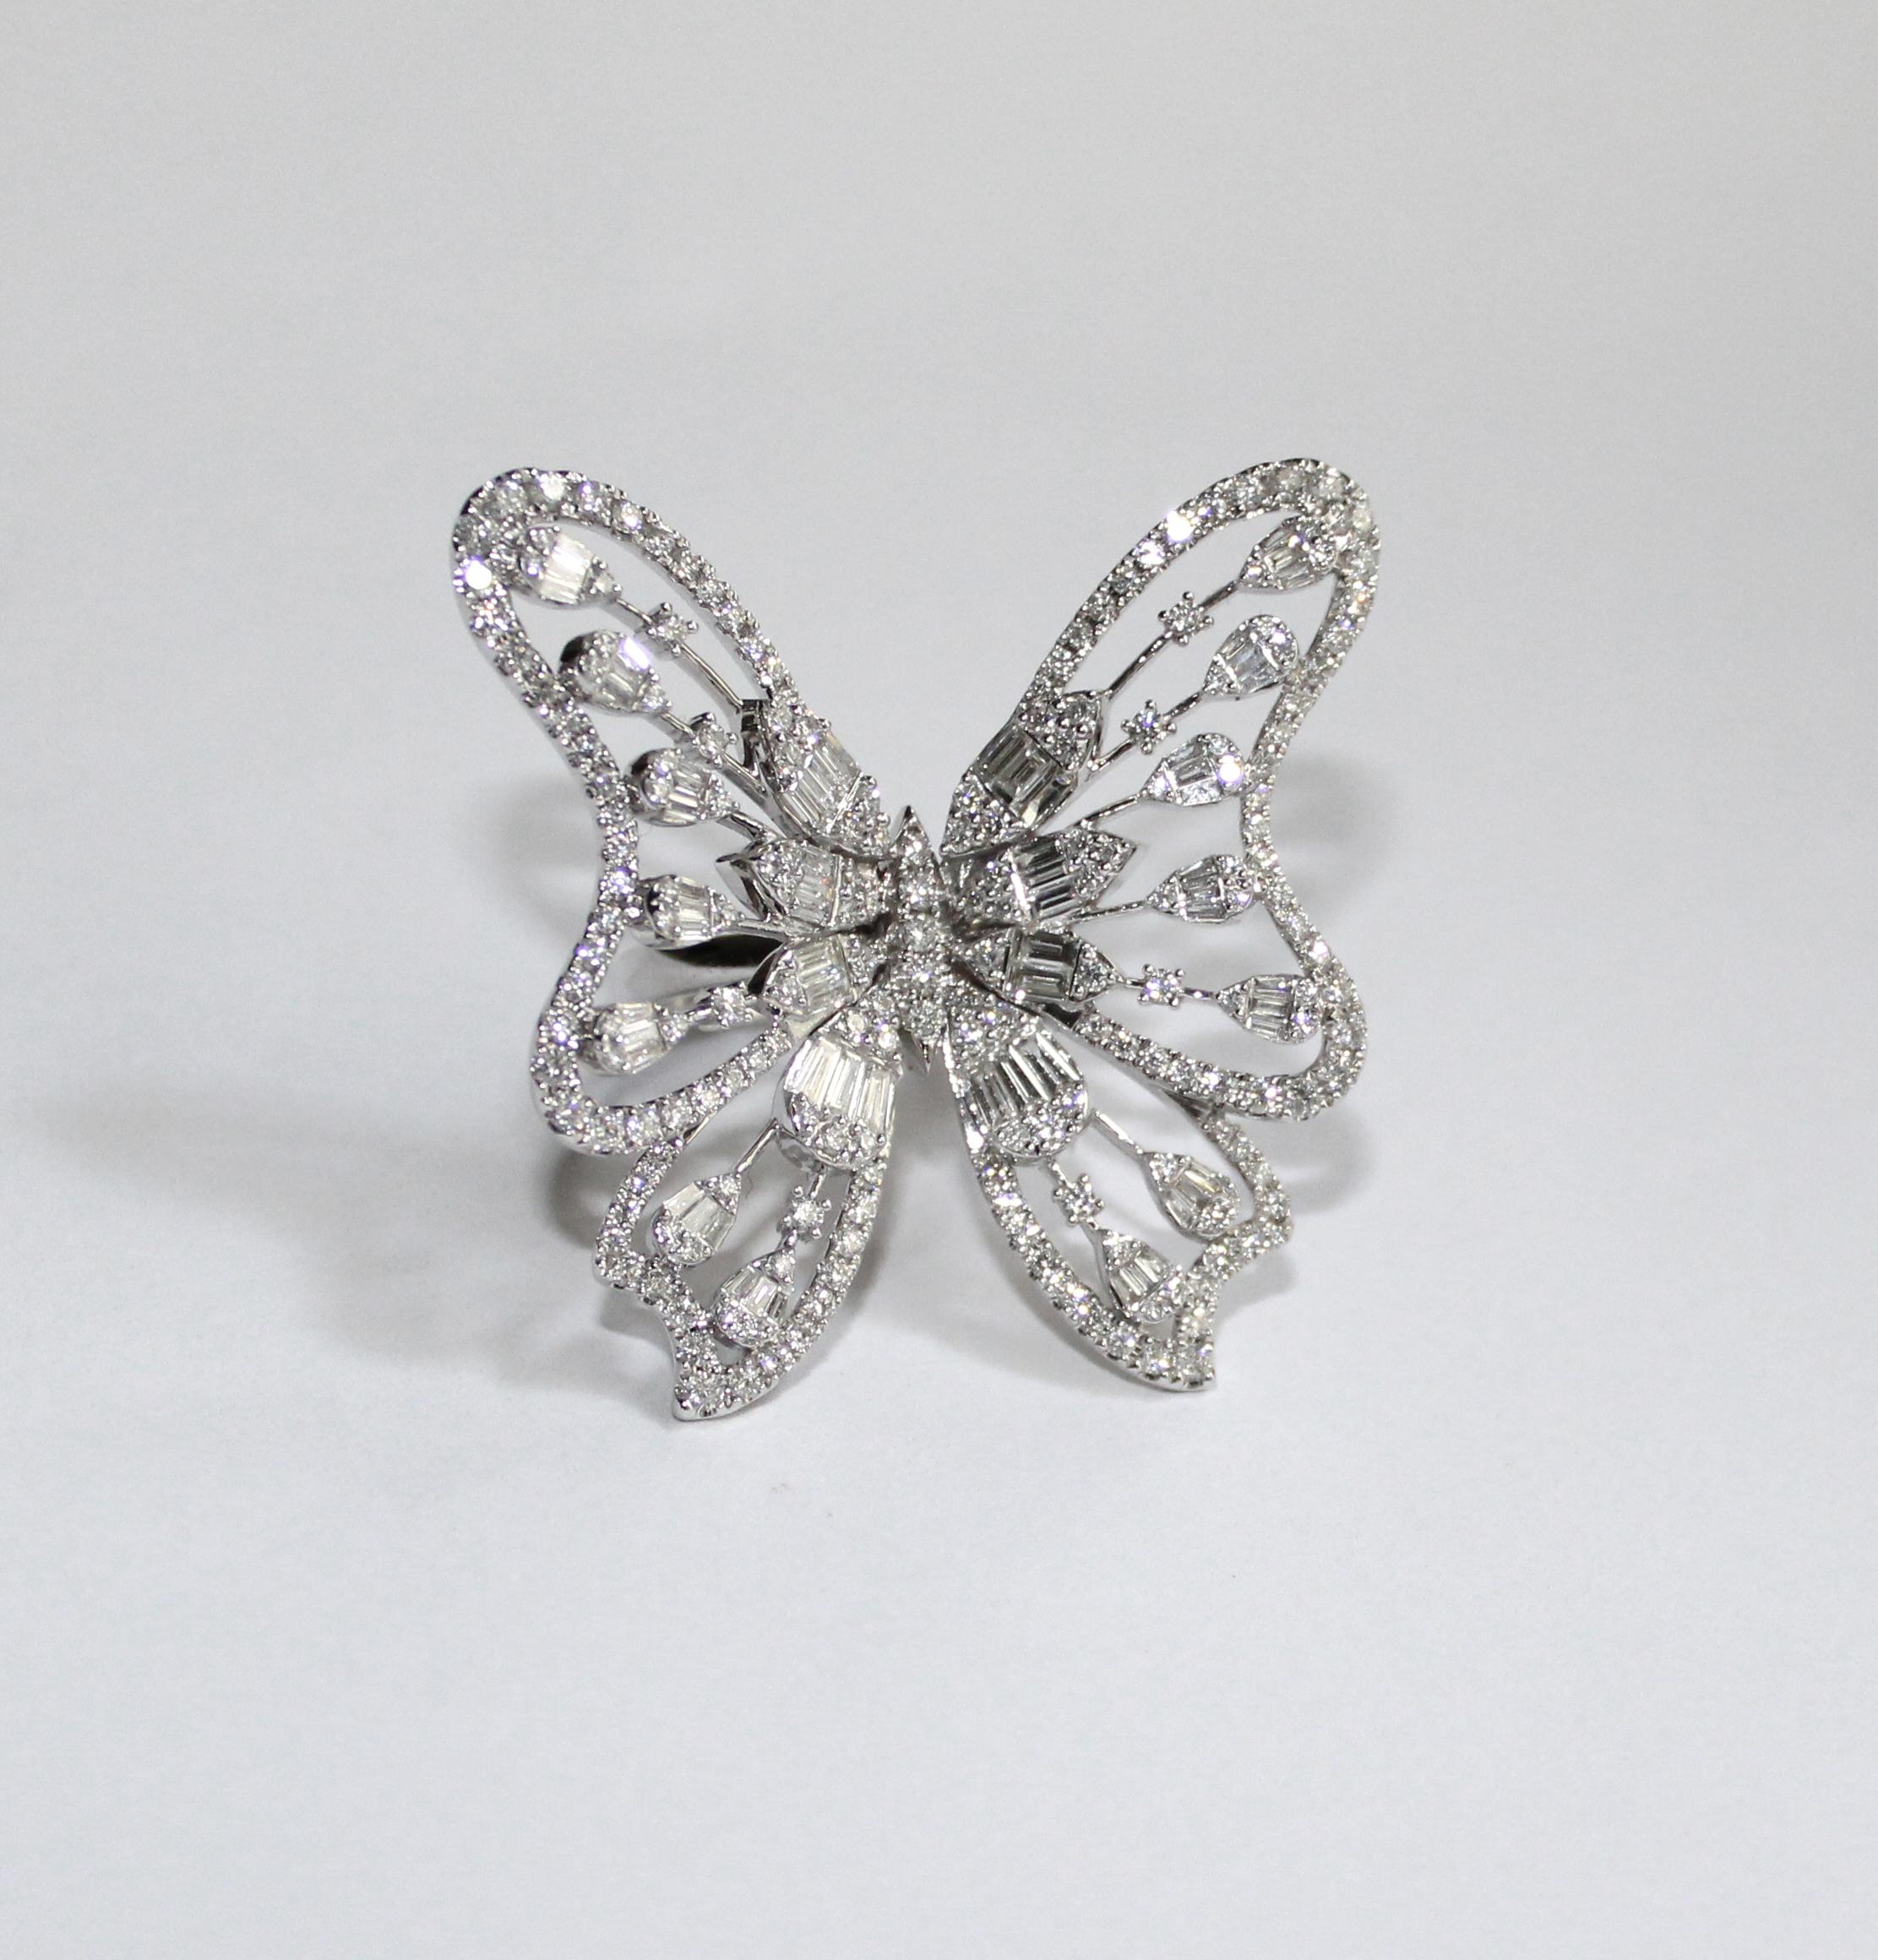 Exceptional delicate 18K white gold round and baguette diamond cocktail ring in the shape of a butterfly.

The butterfly has a hidden clasp, which can be undone to easily transform the ring into a pendant. The pendant comes with an extra fine 18K